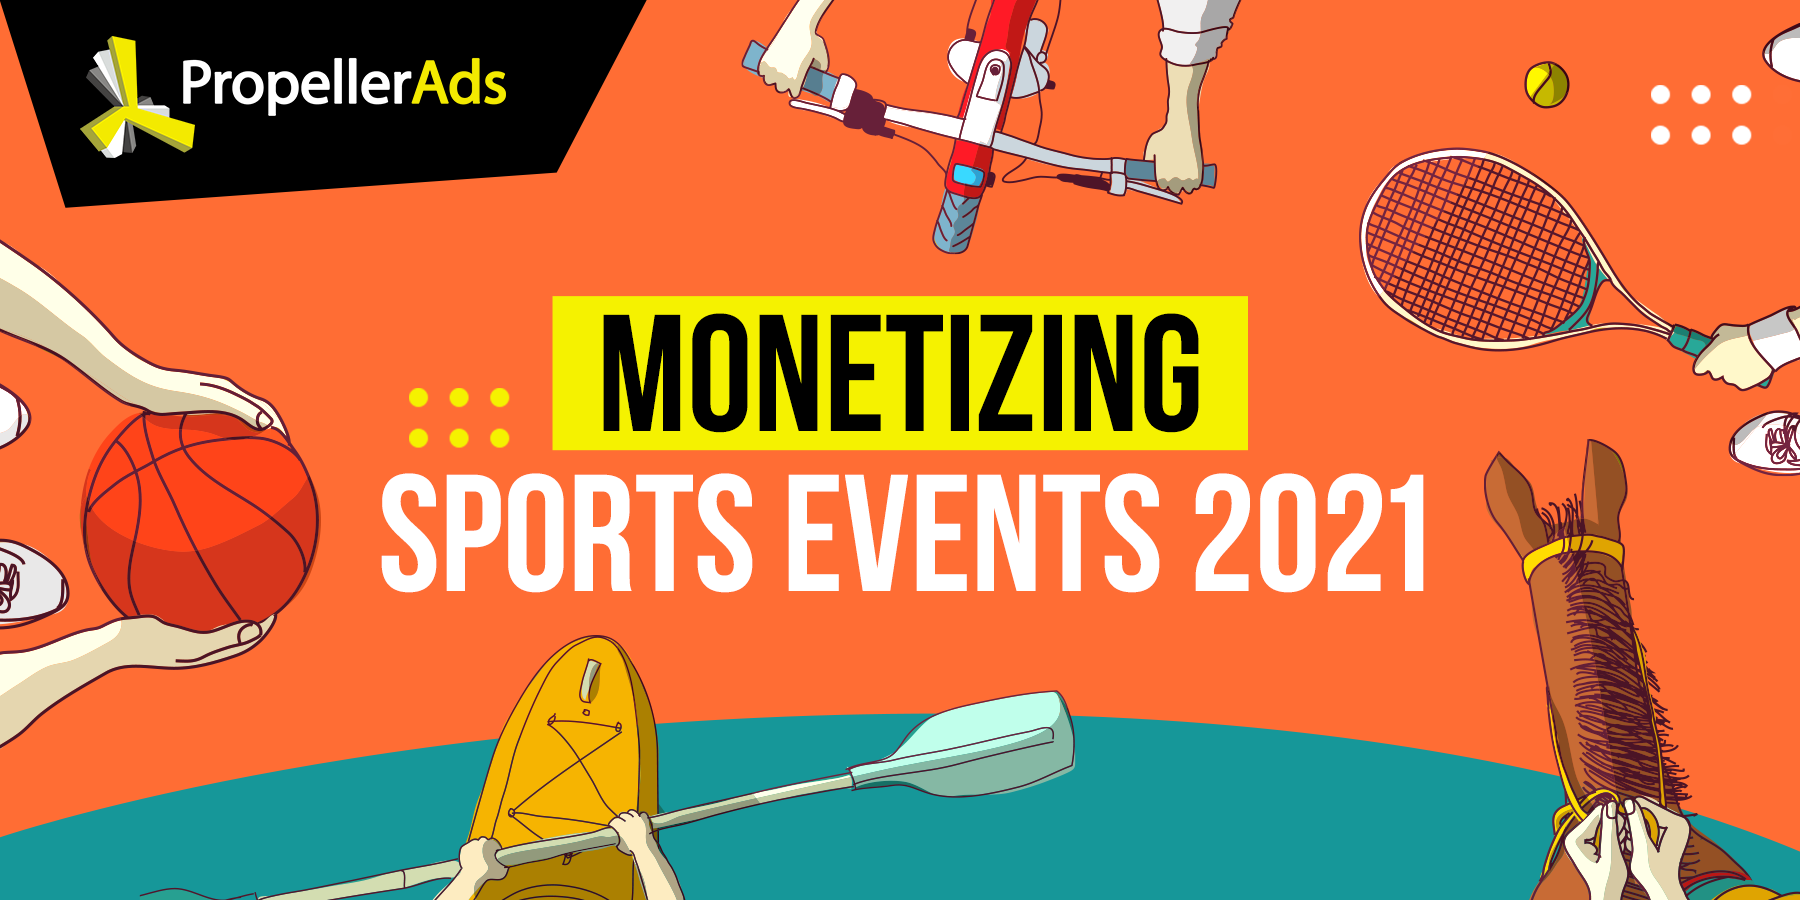 how to monetize sports events 2021